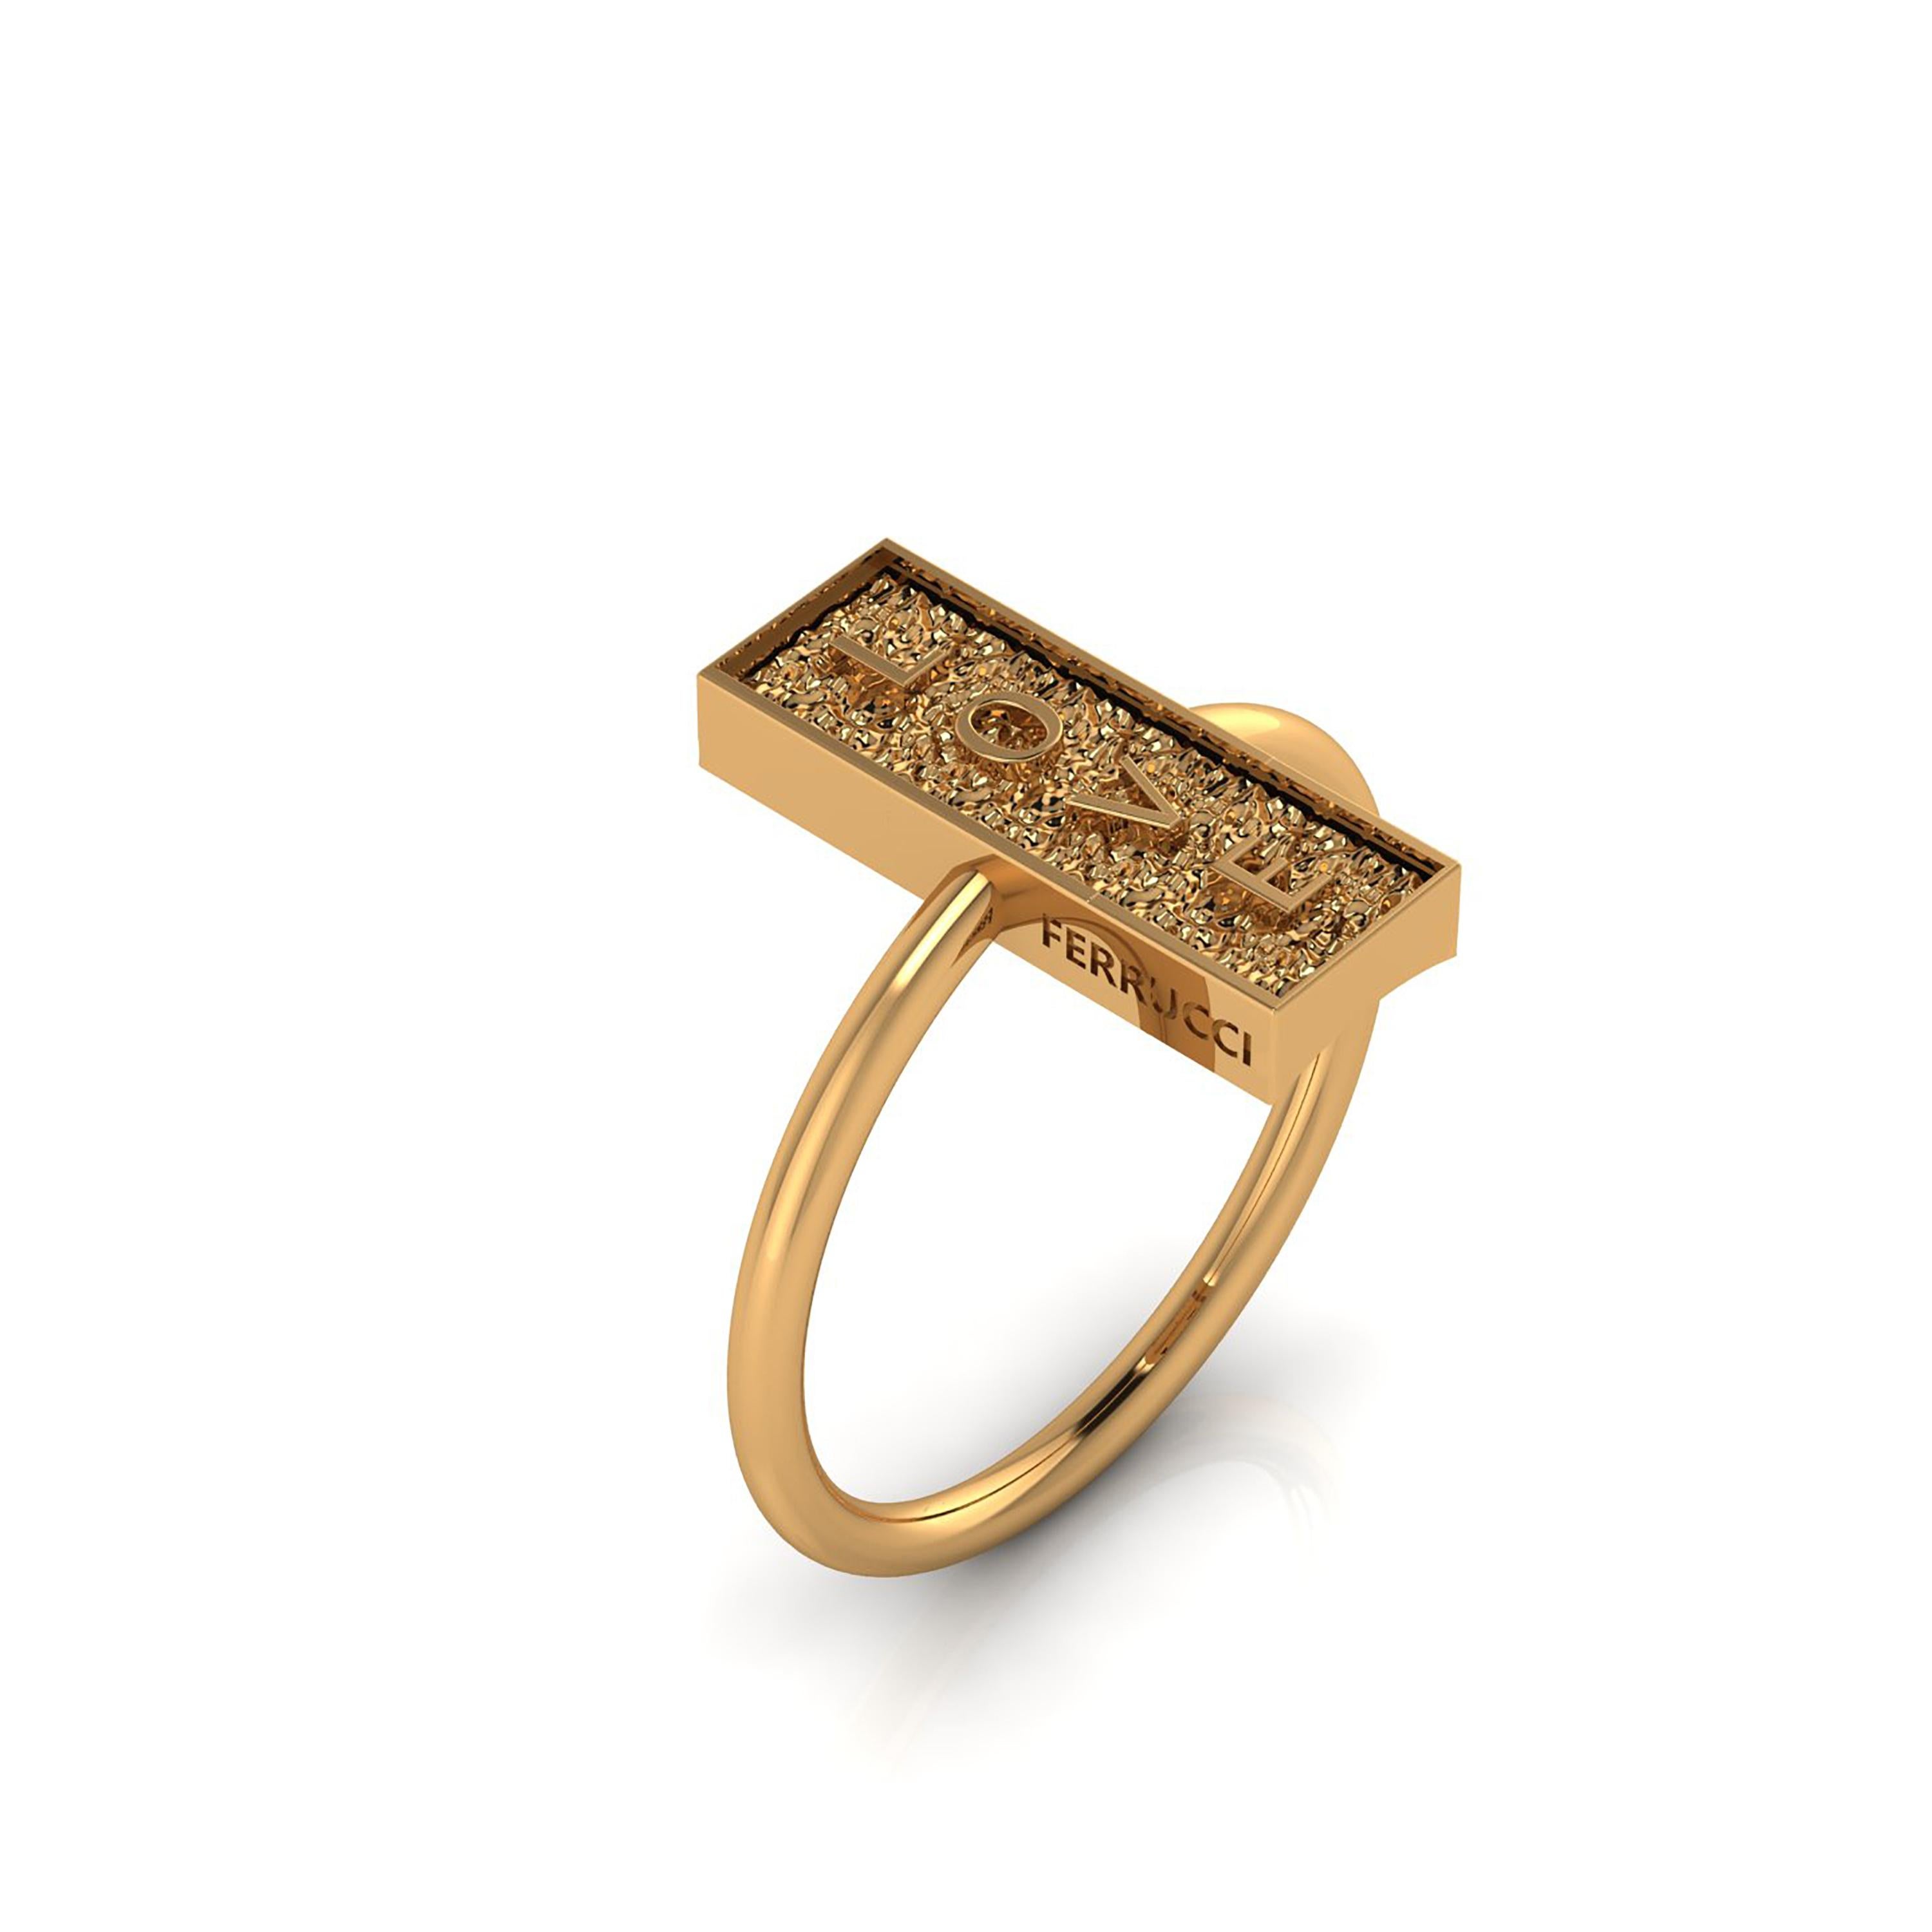 FERRUCCI the Love Rock ring, conceived in 18k yellow gold, a new way to bring with you the classy, beautiful 18k yellow gold, everlasting in time, modern and bold shapes combined with the organic surface of rocks. Symbolizing everlasting Love